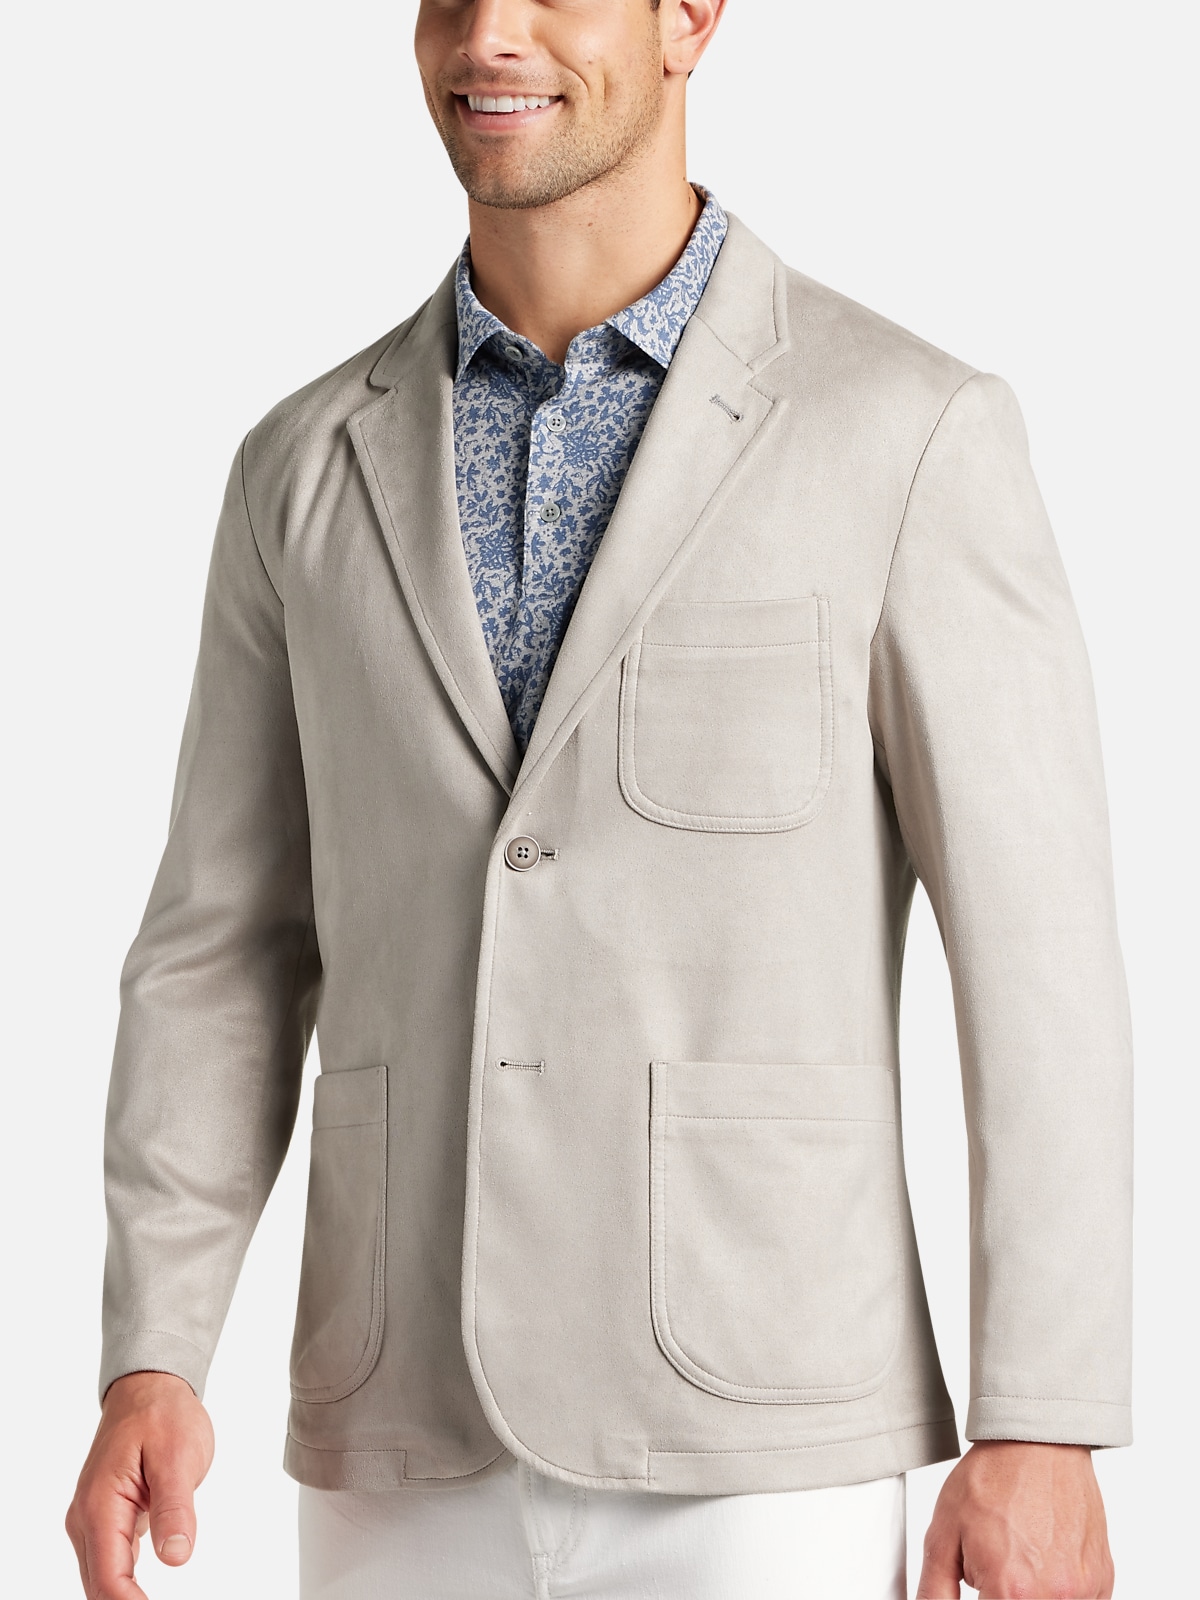 Joseph Abboud Modern Fit Ultrasuede Soft Coat | All Clearance $39.99 ...